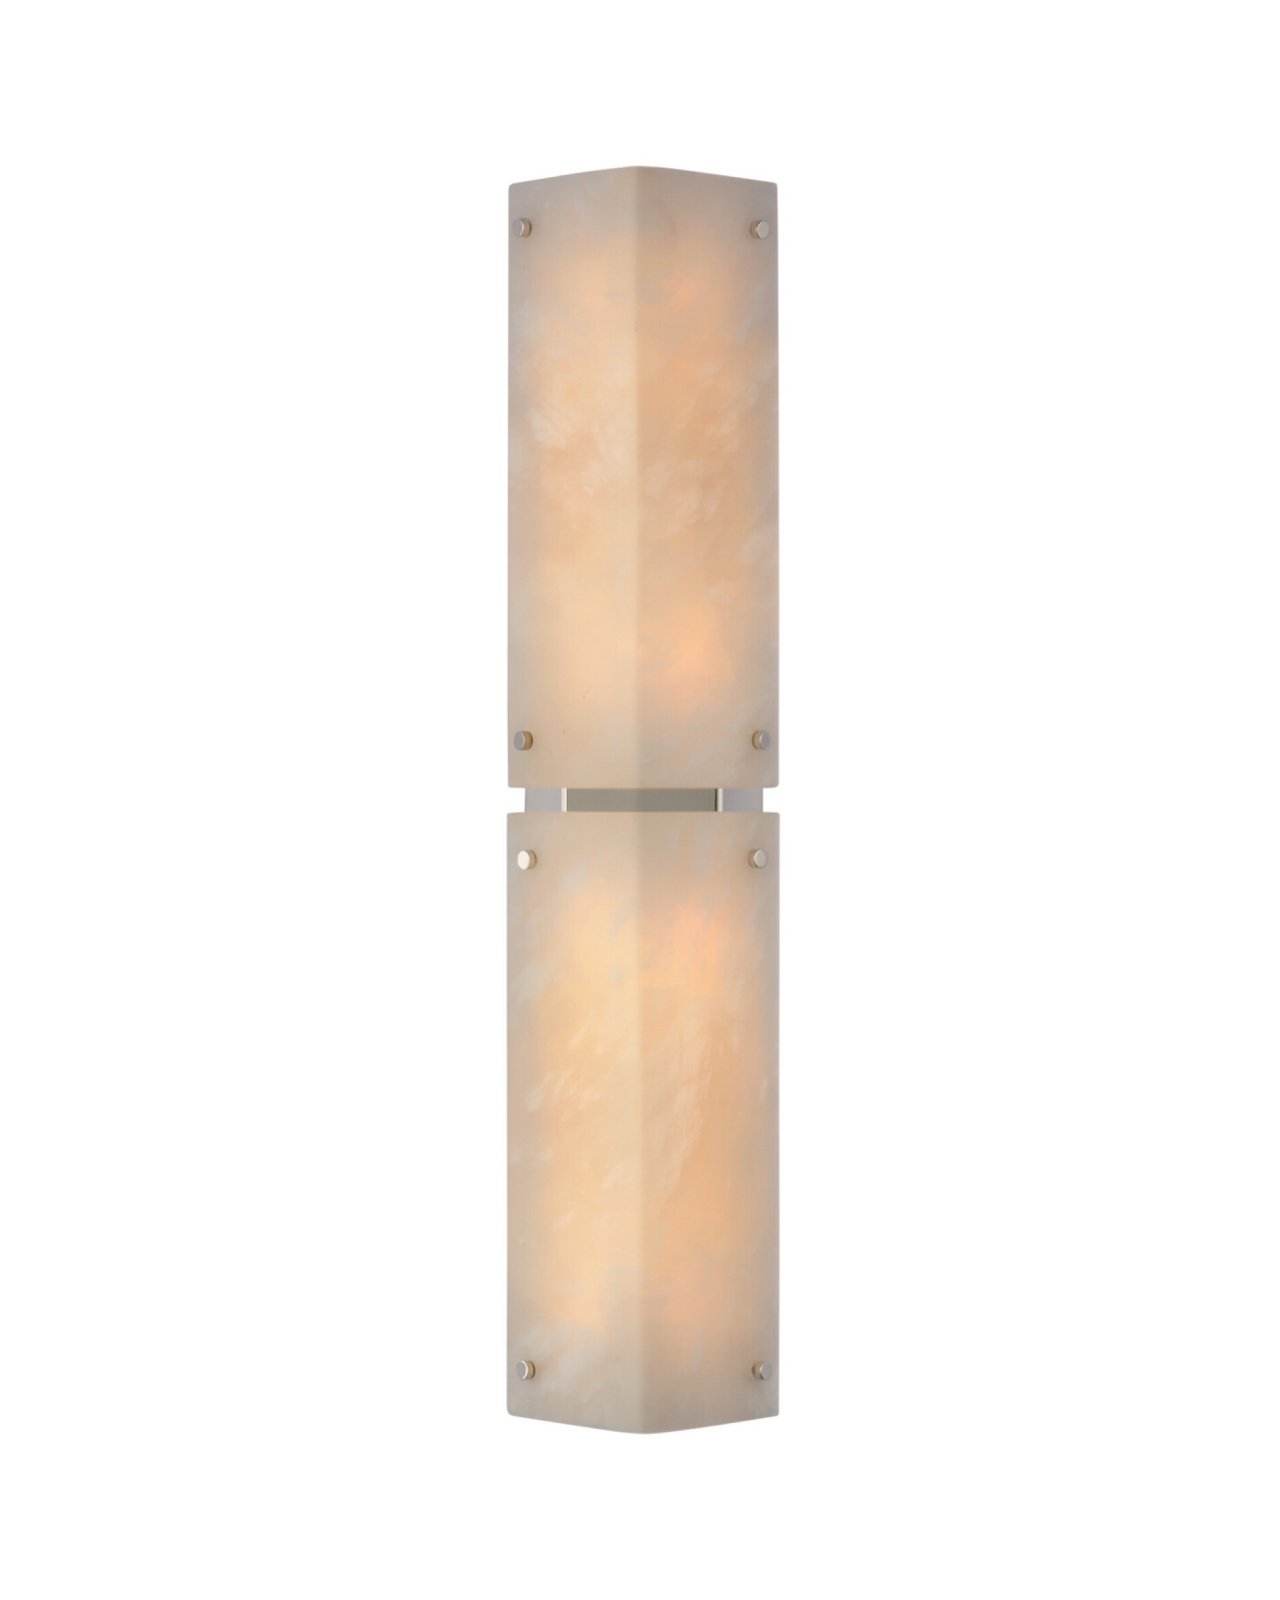 Clayton 25" Wall Sconce Polished Nickel and Alabaster